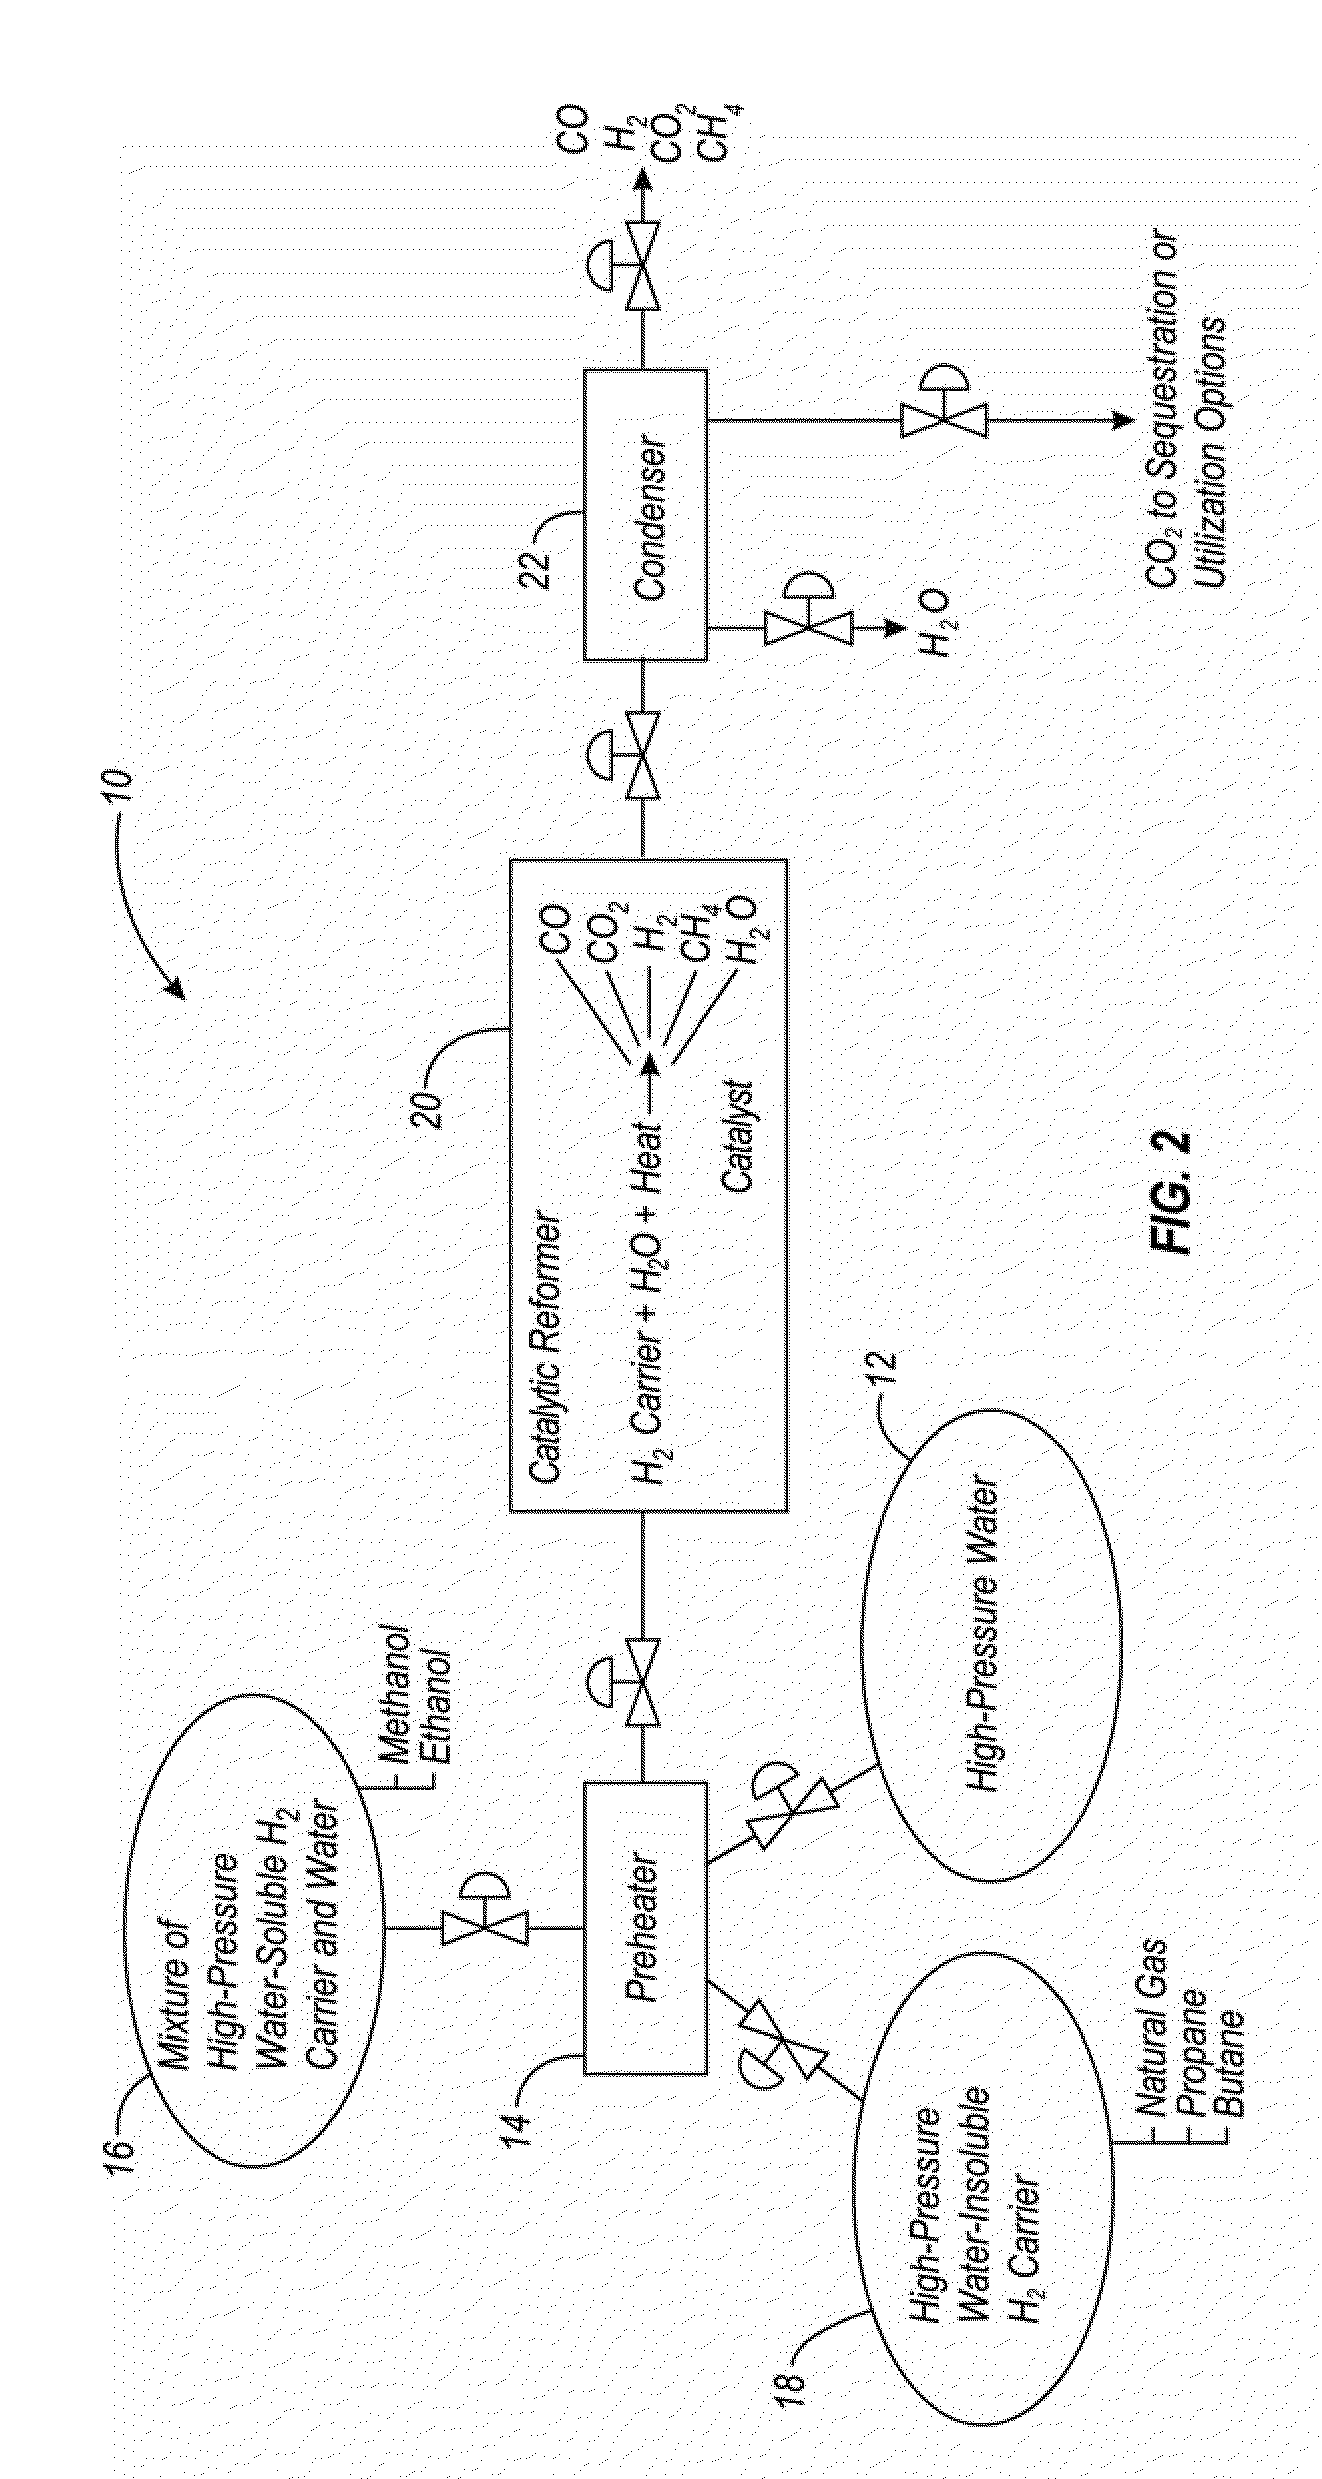 System and process for producing high-pressure hydrogen